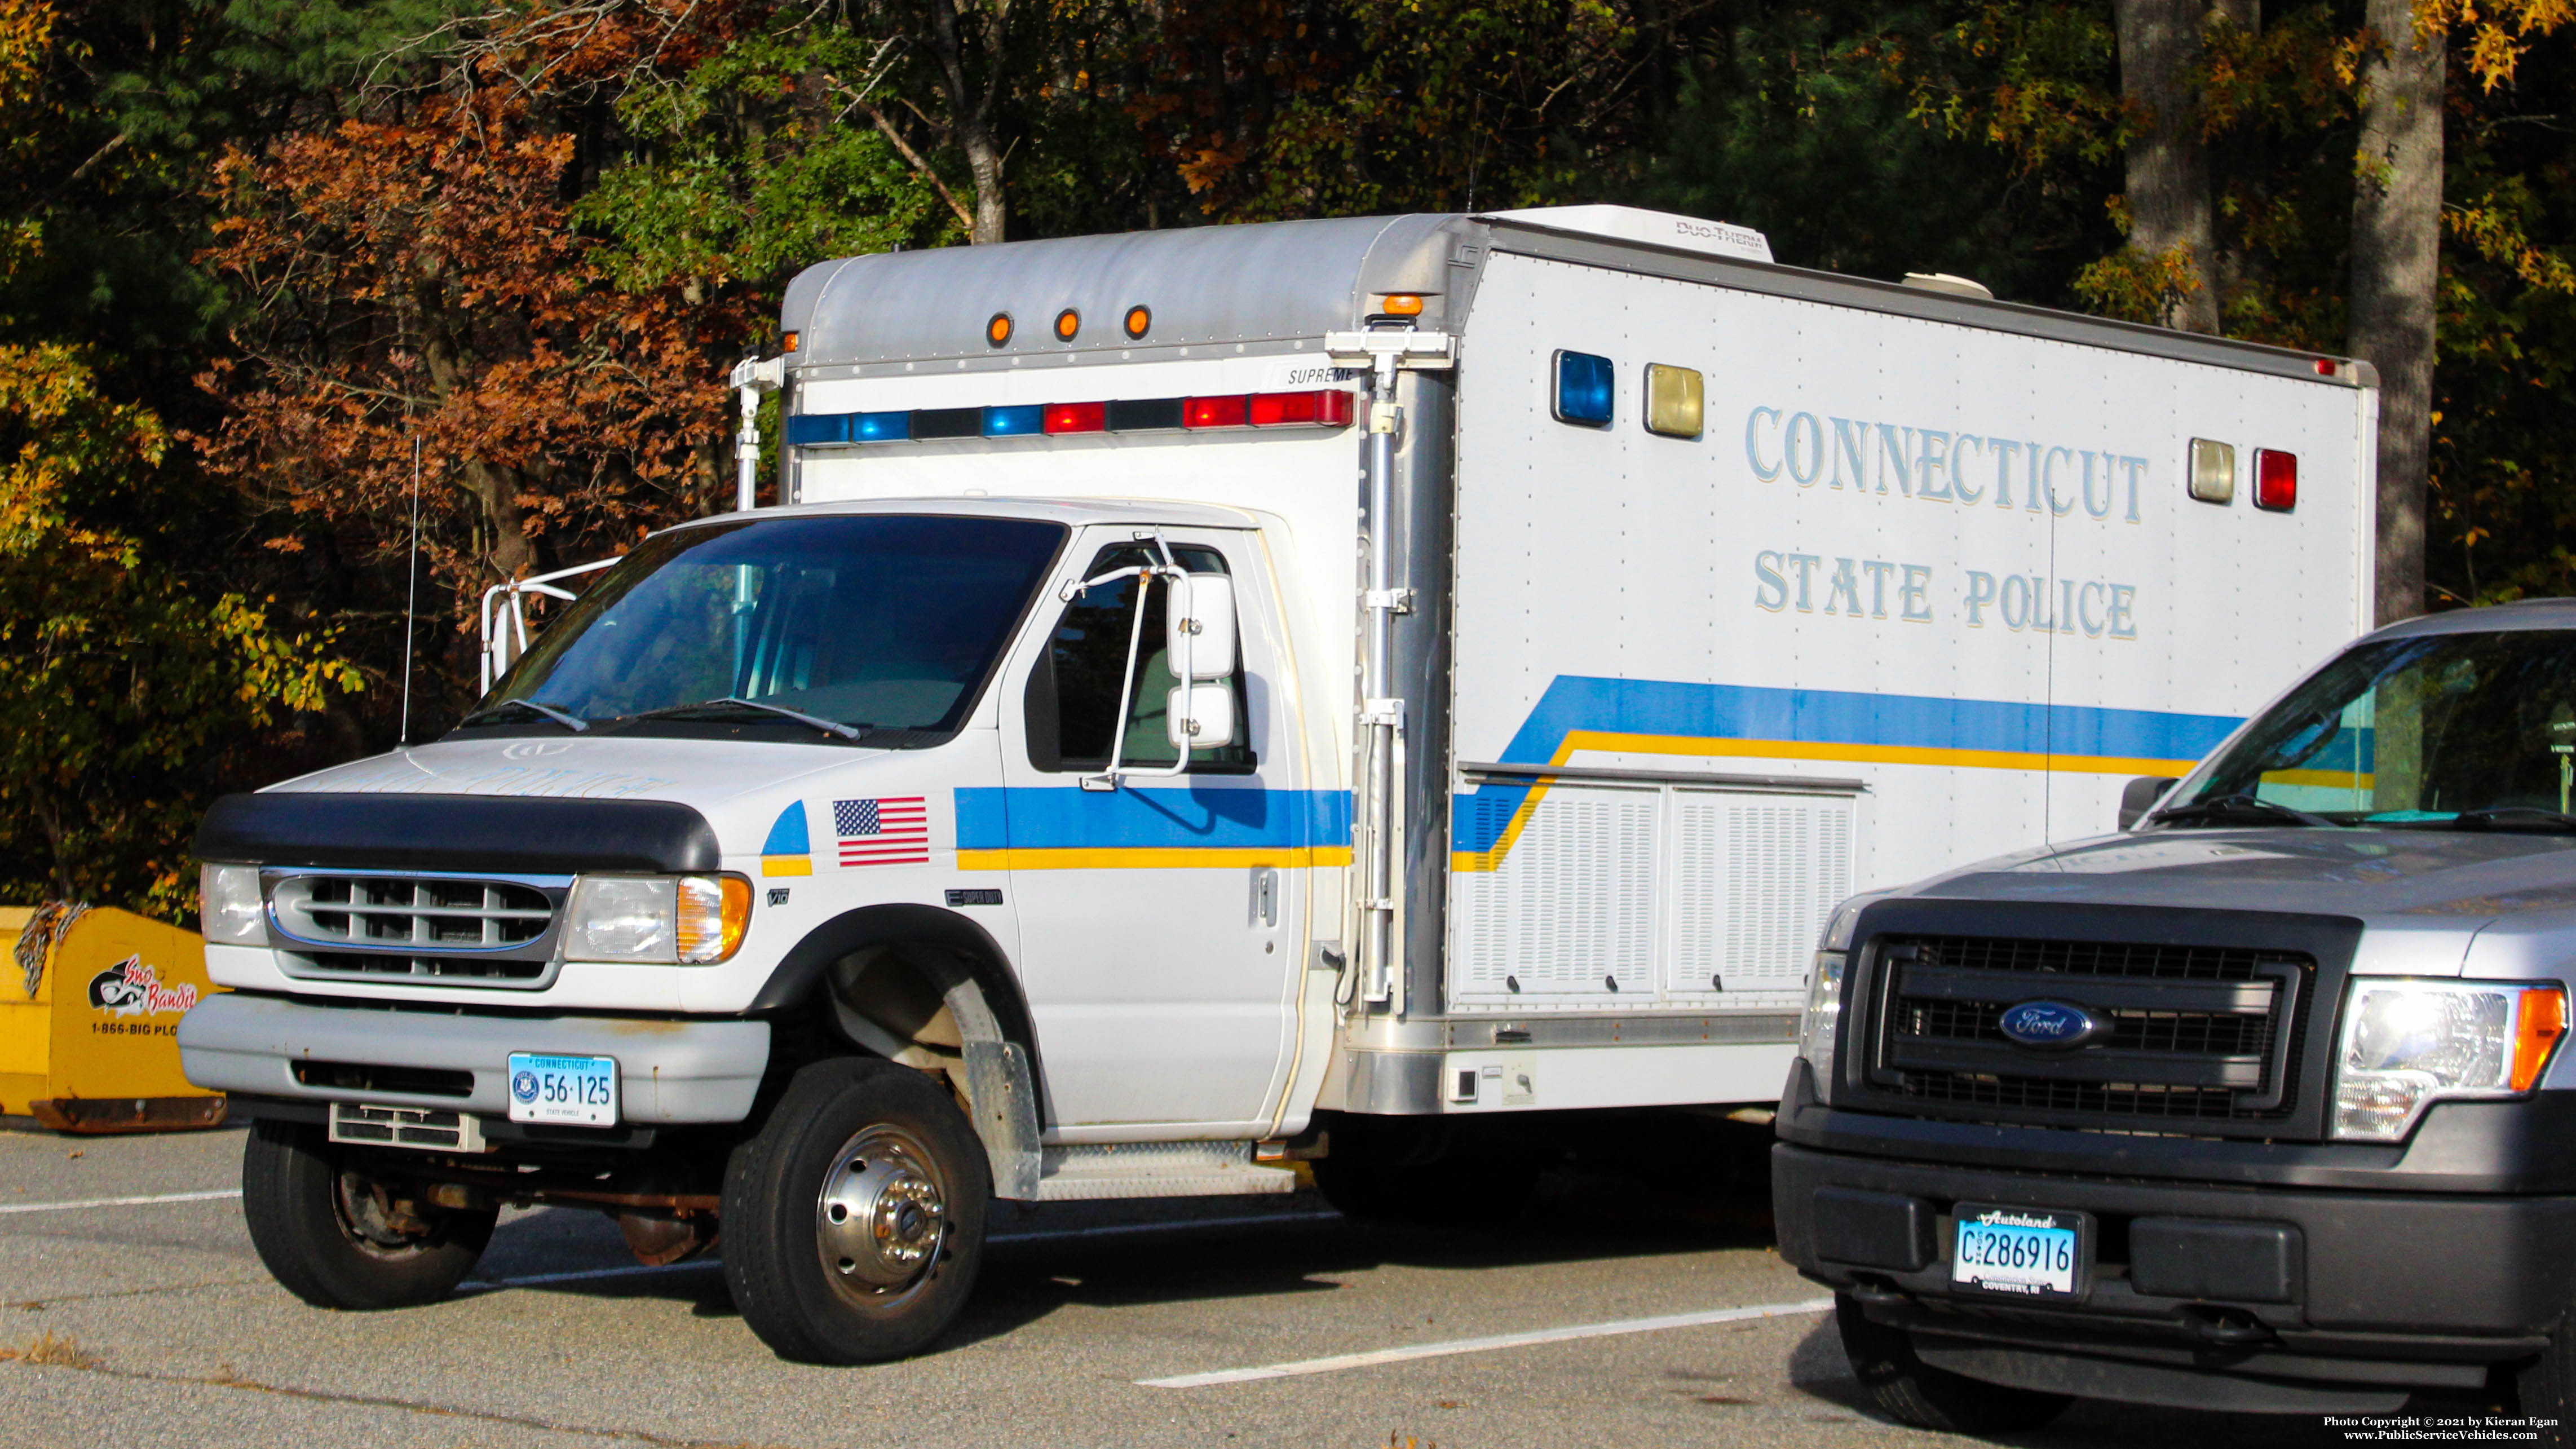 A photo  of Connecticut State Police
            Unit 56-125, a 1990-1998 Ford E-Super Duty             taken by Kieran Egan